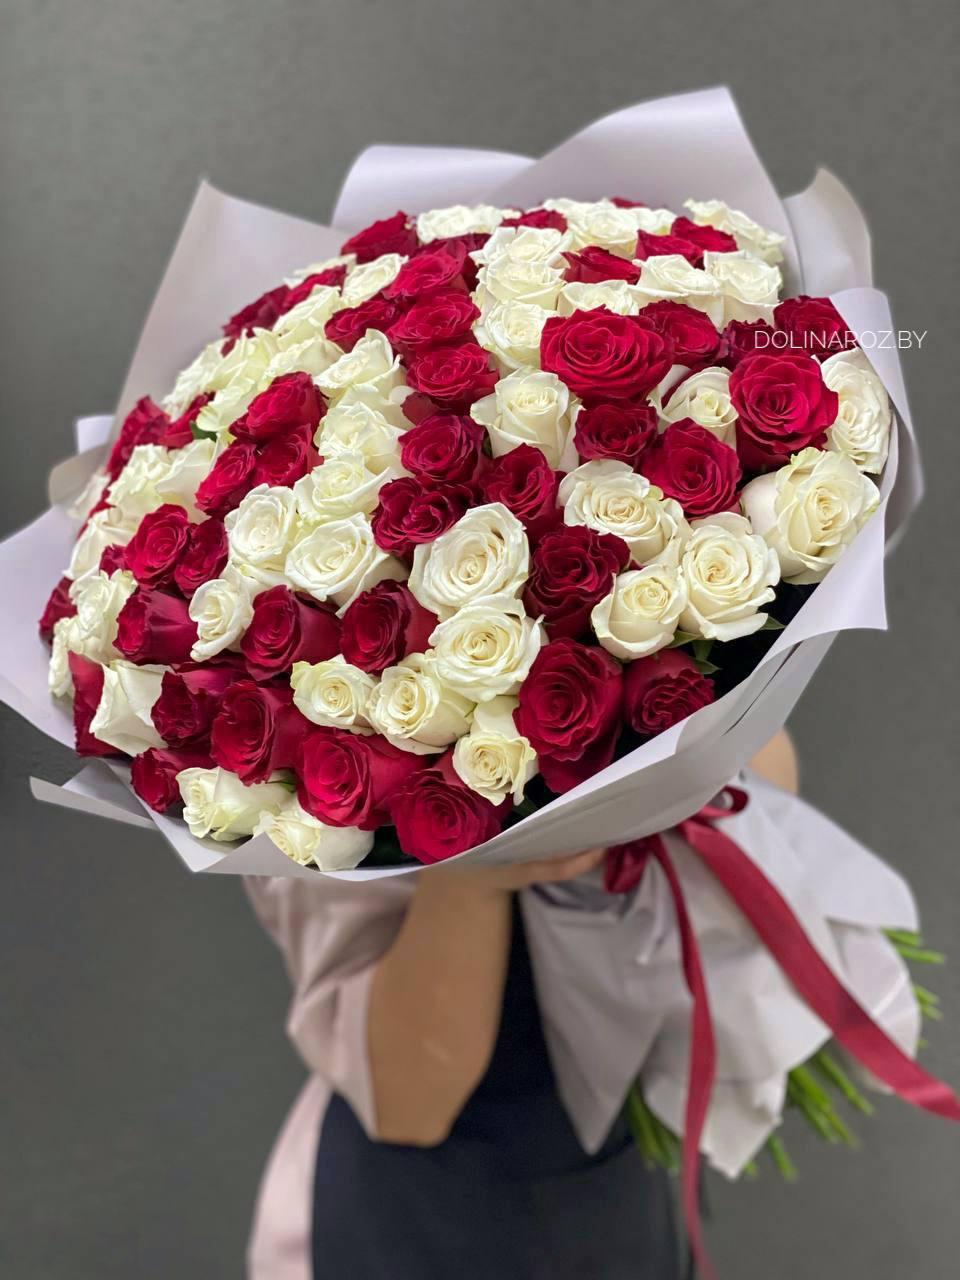 Bouquet of roses "Red and white mix"